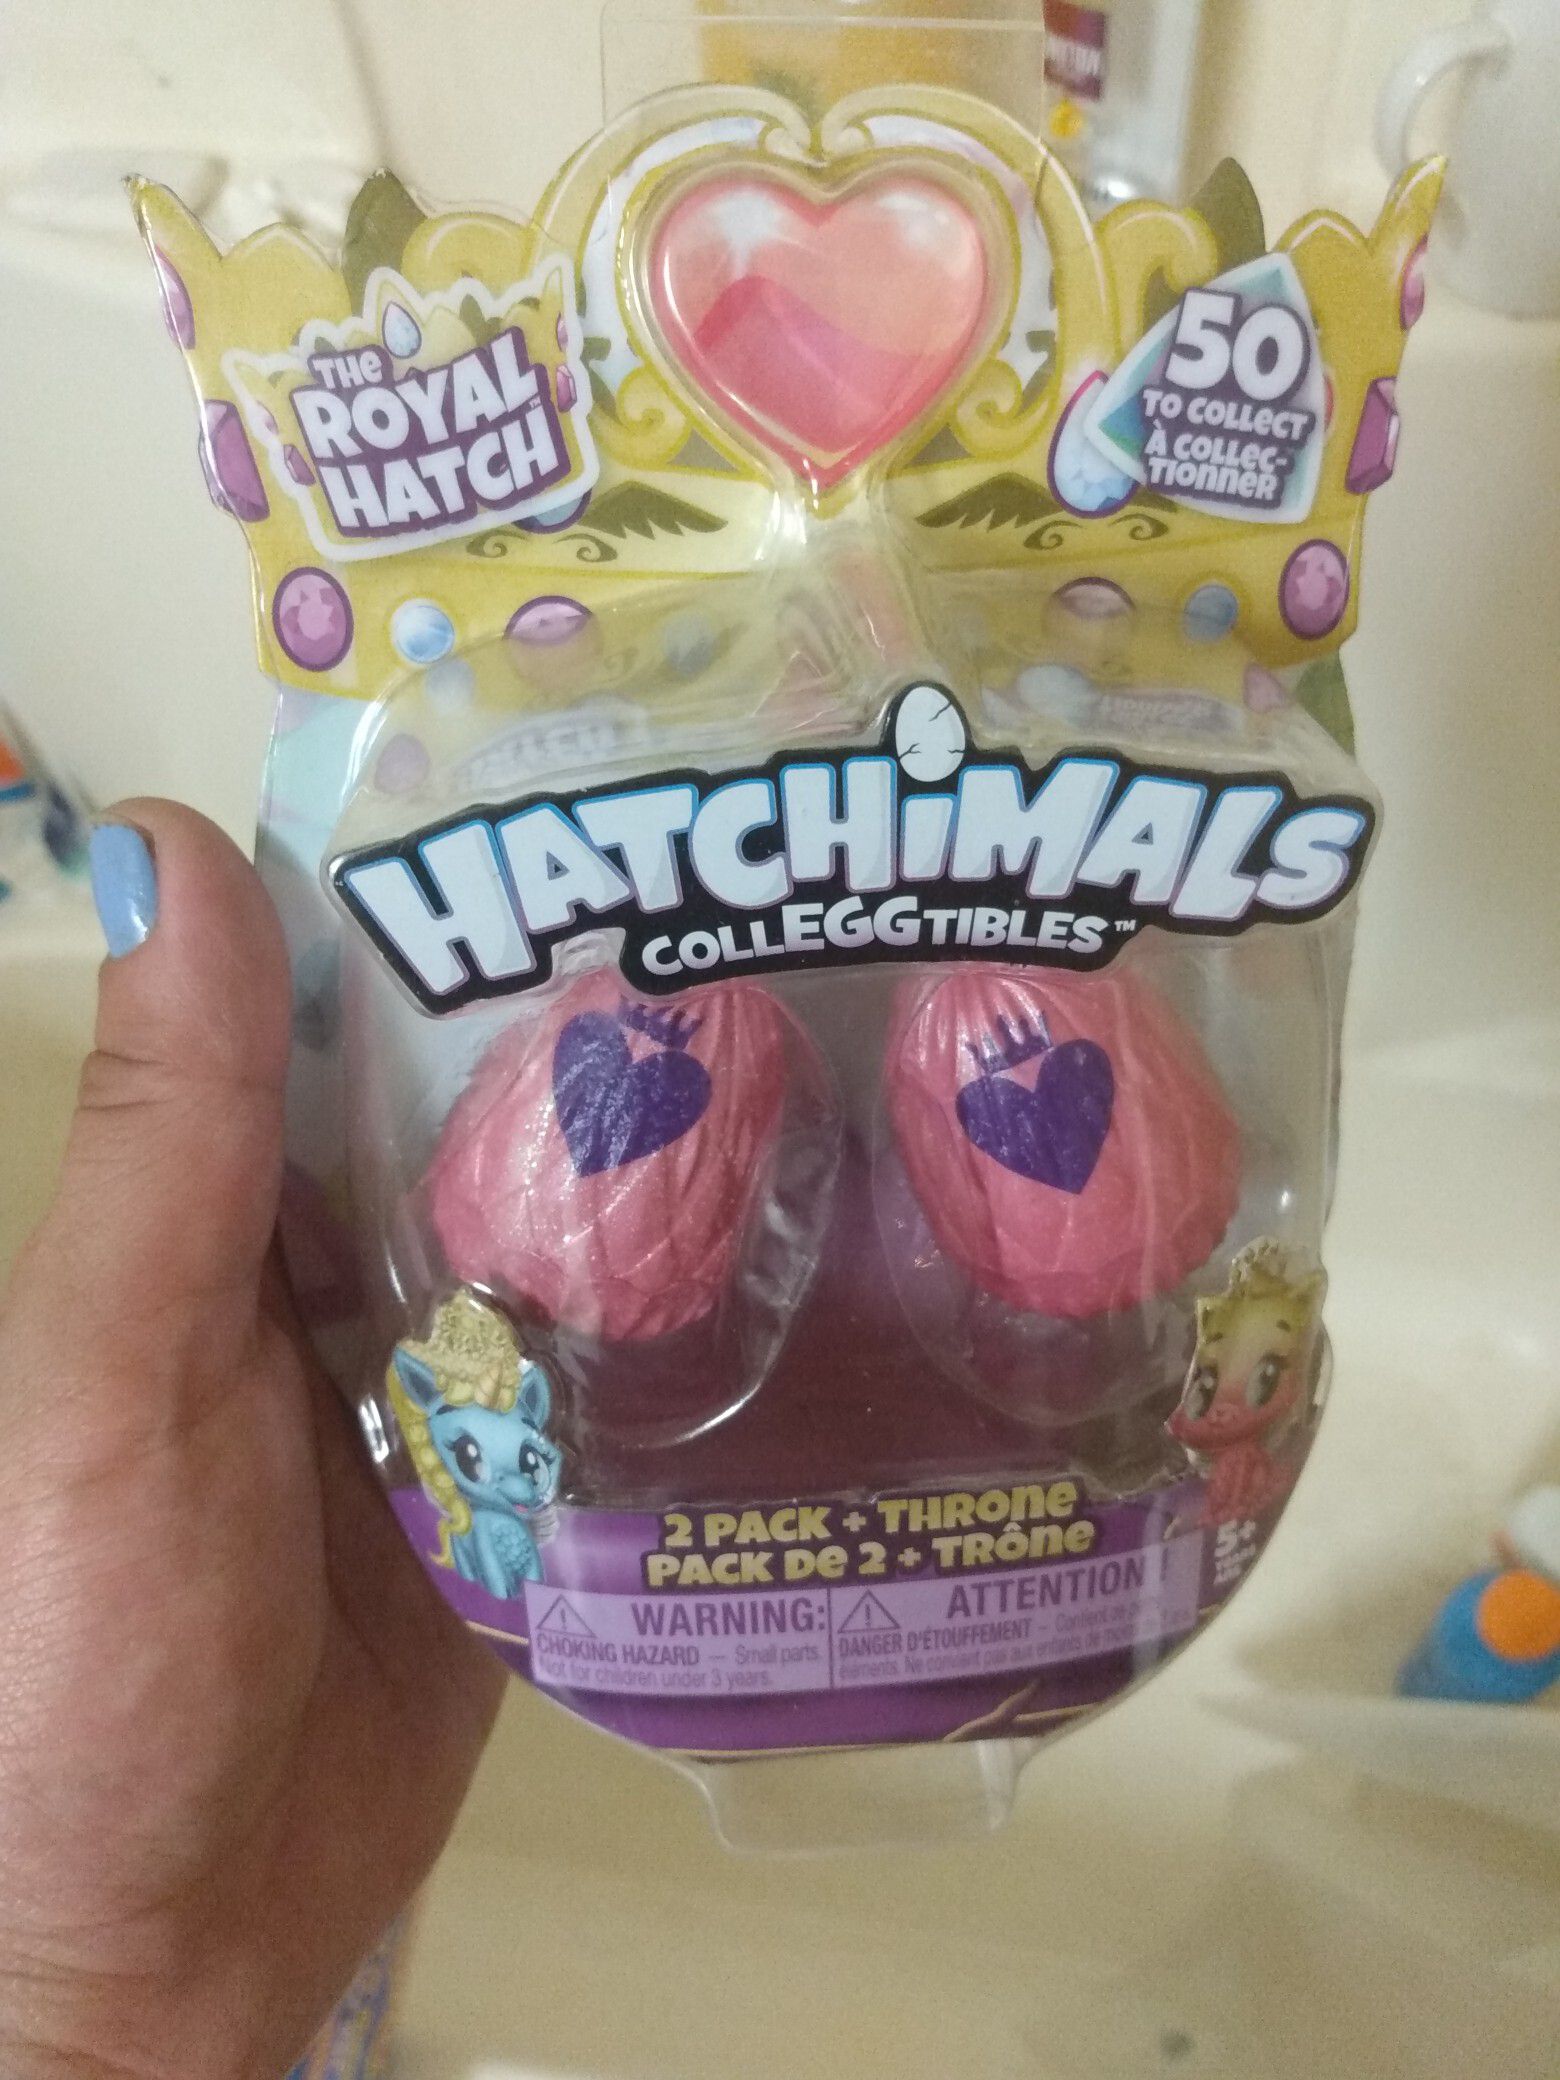 Hatchimals The Royal Hatch 2 pack + throne